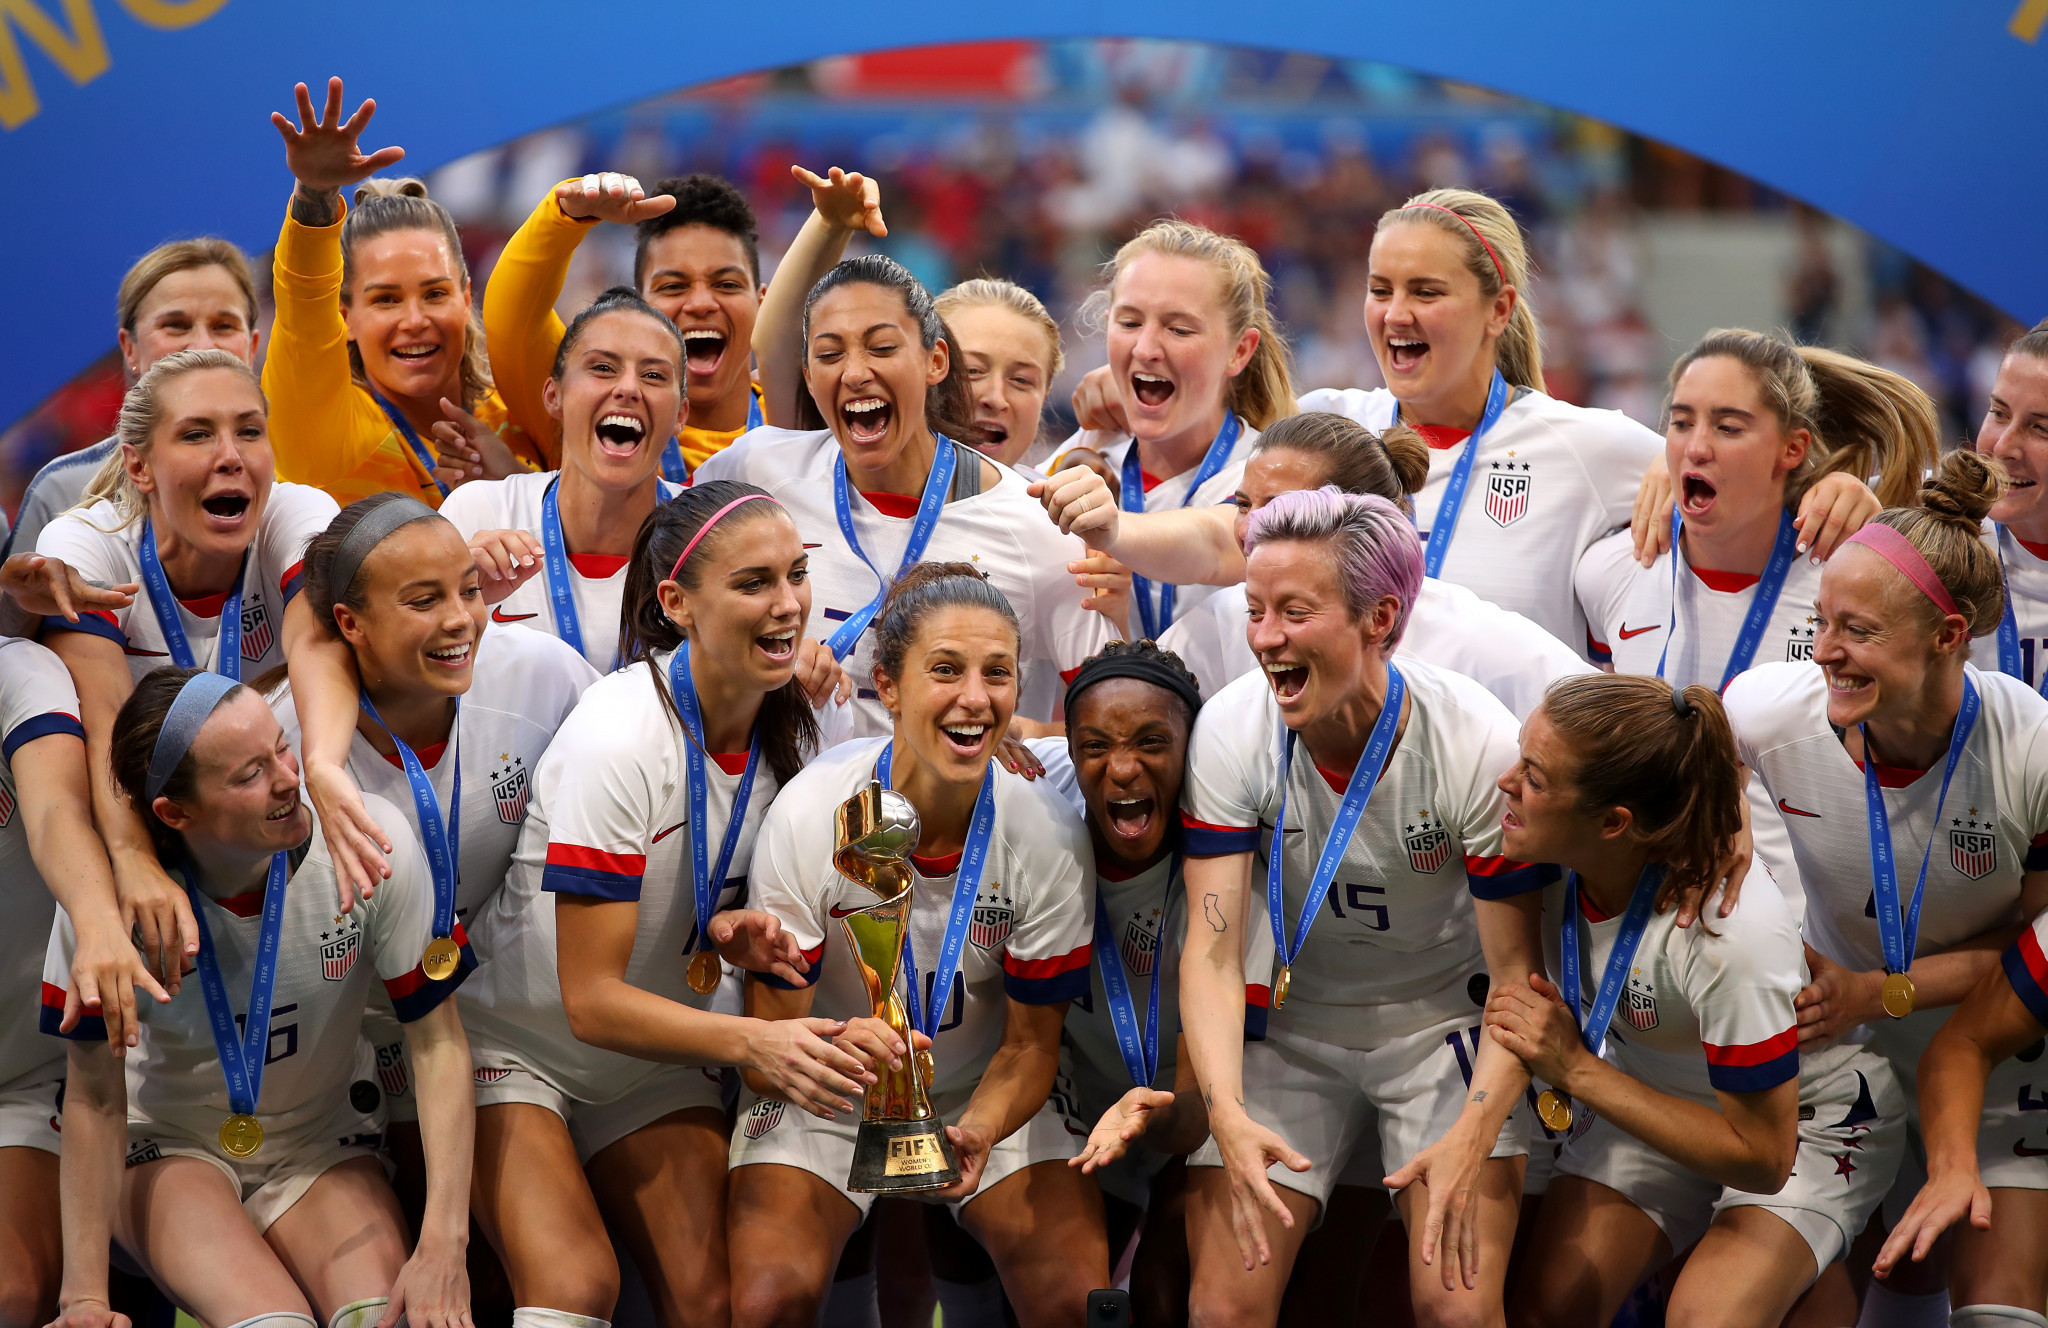 The United States will be aiming to win their third straight Women's World Cup crown and fifth overall when the event is staged in Australia and New Zealand later this year ©Getty Images